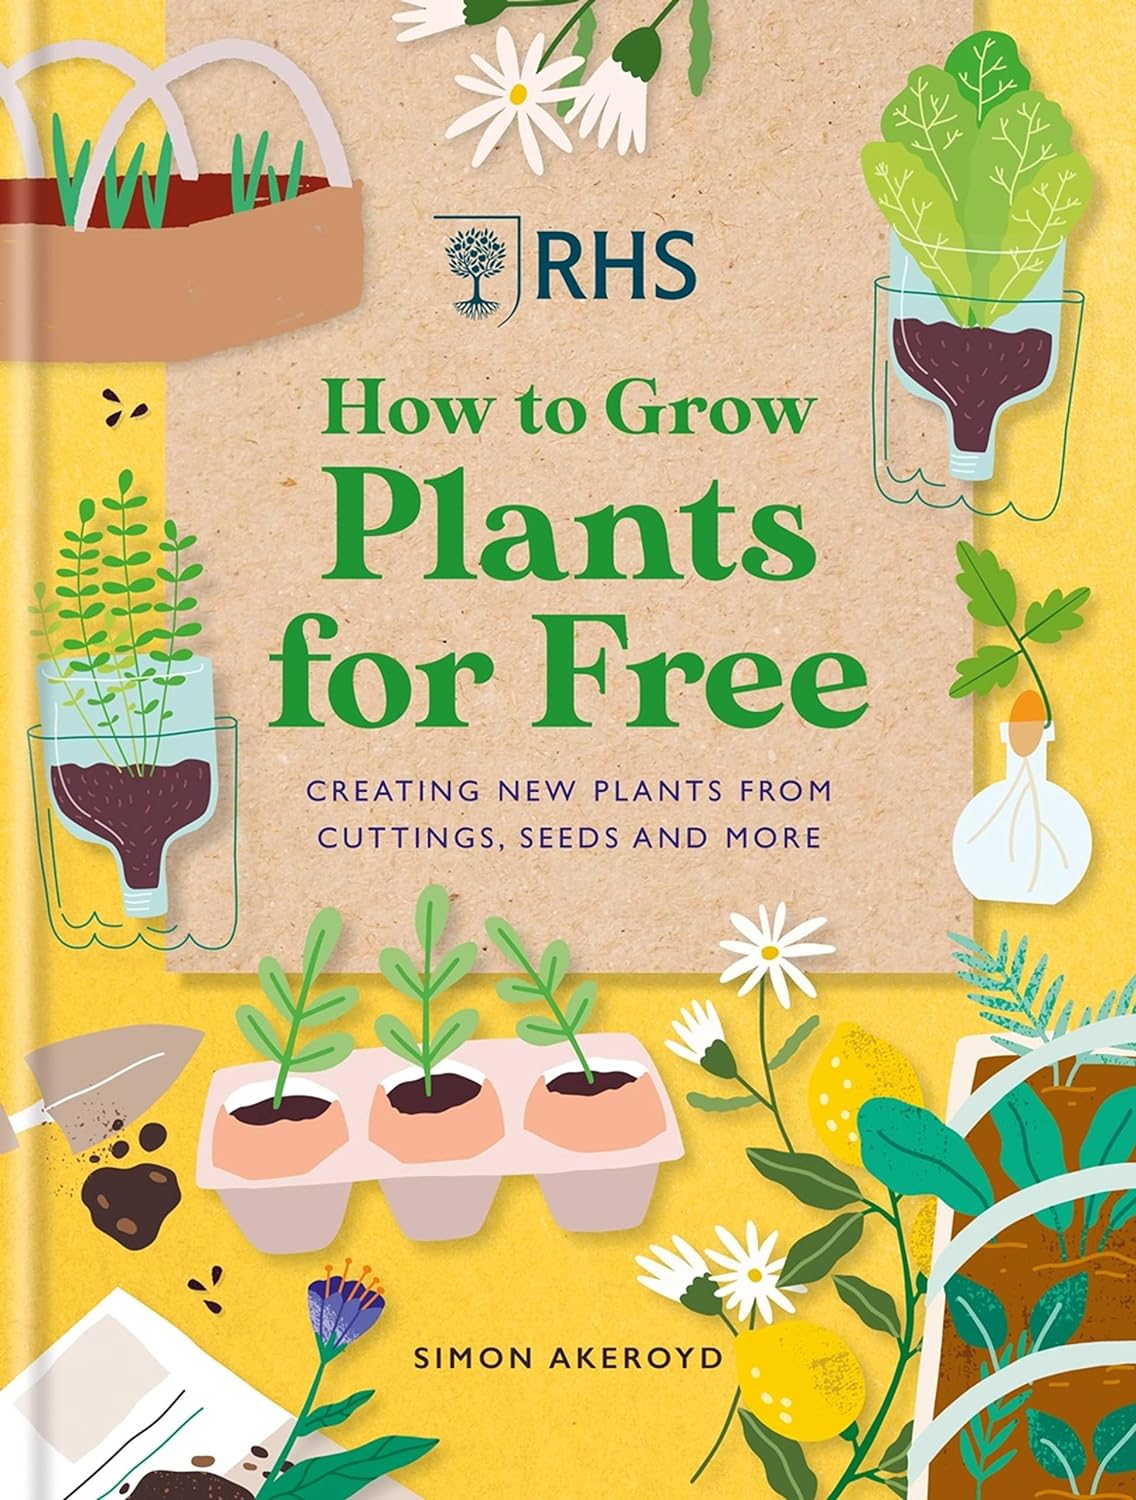 create new plants (from cuttings & seeds)